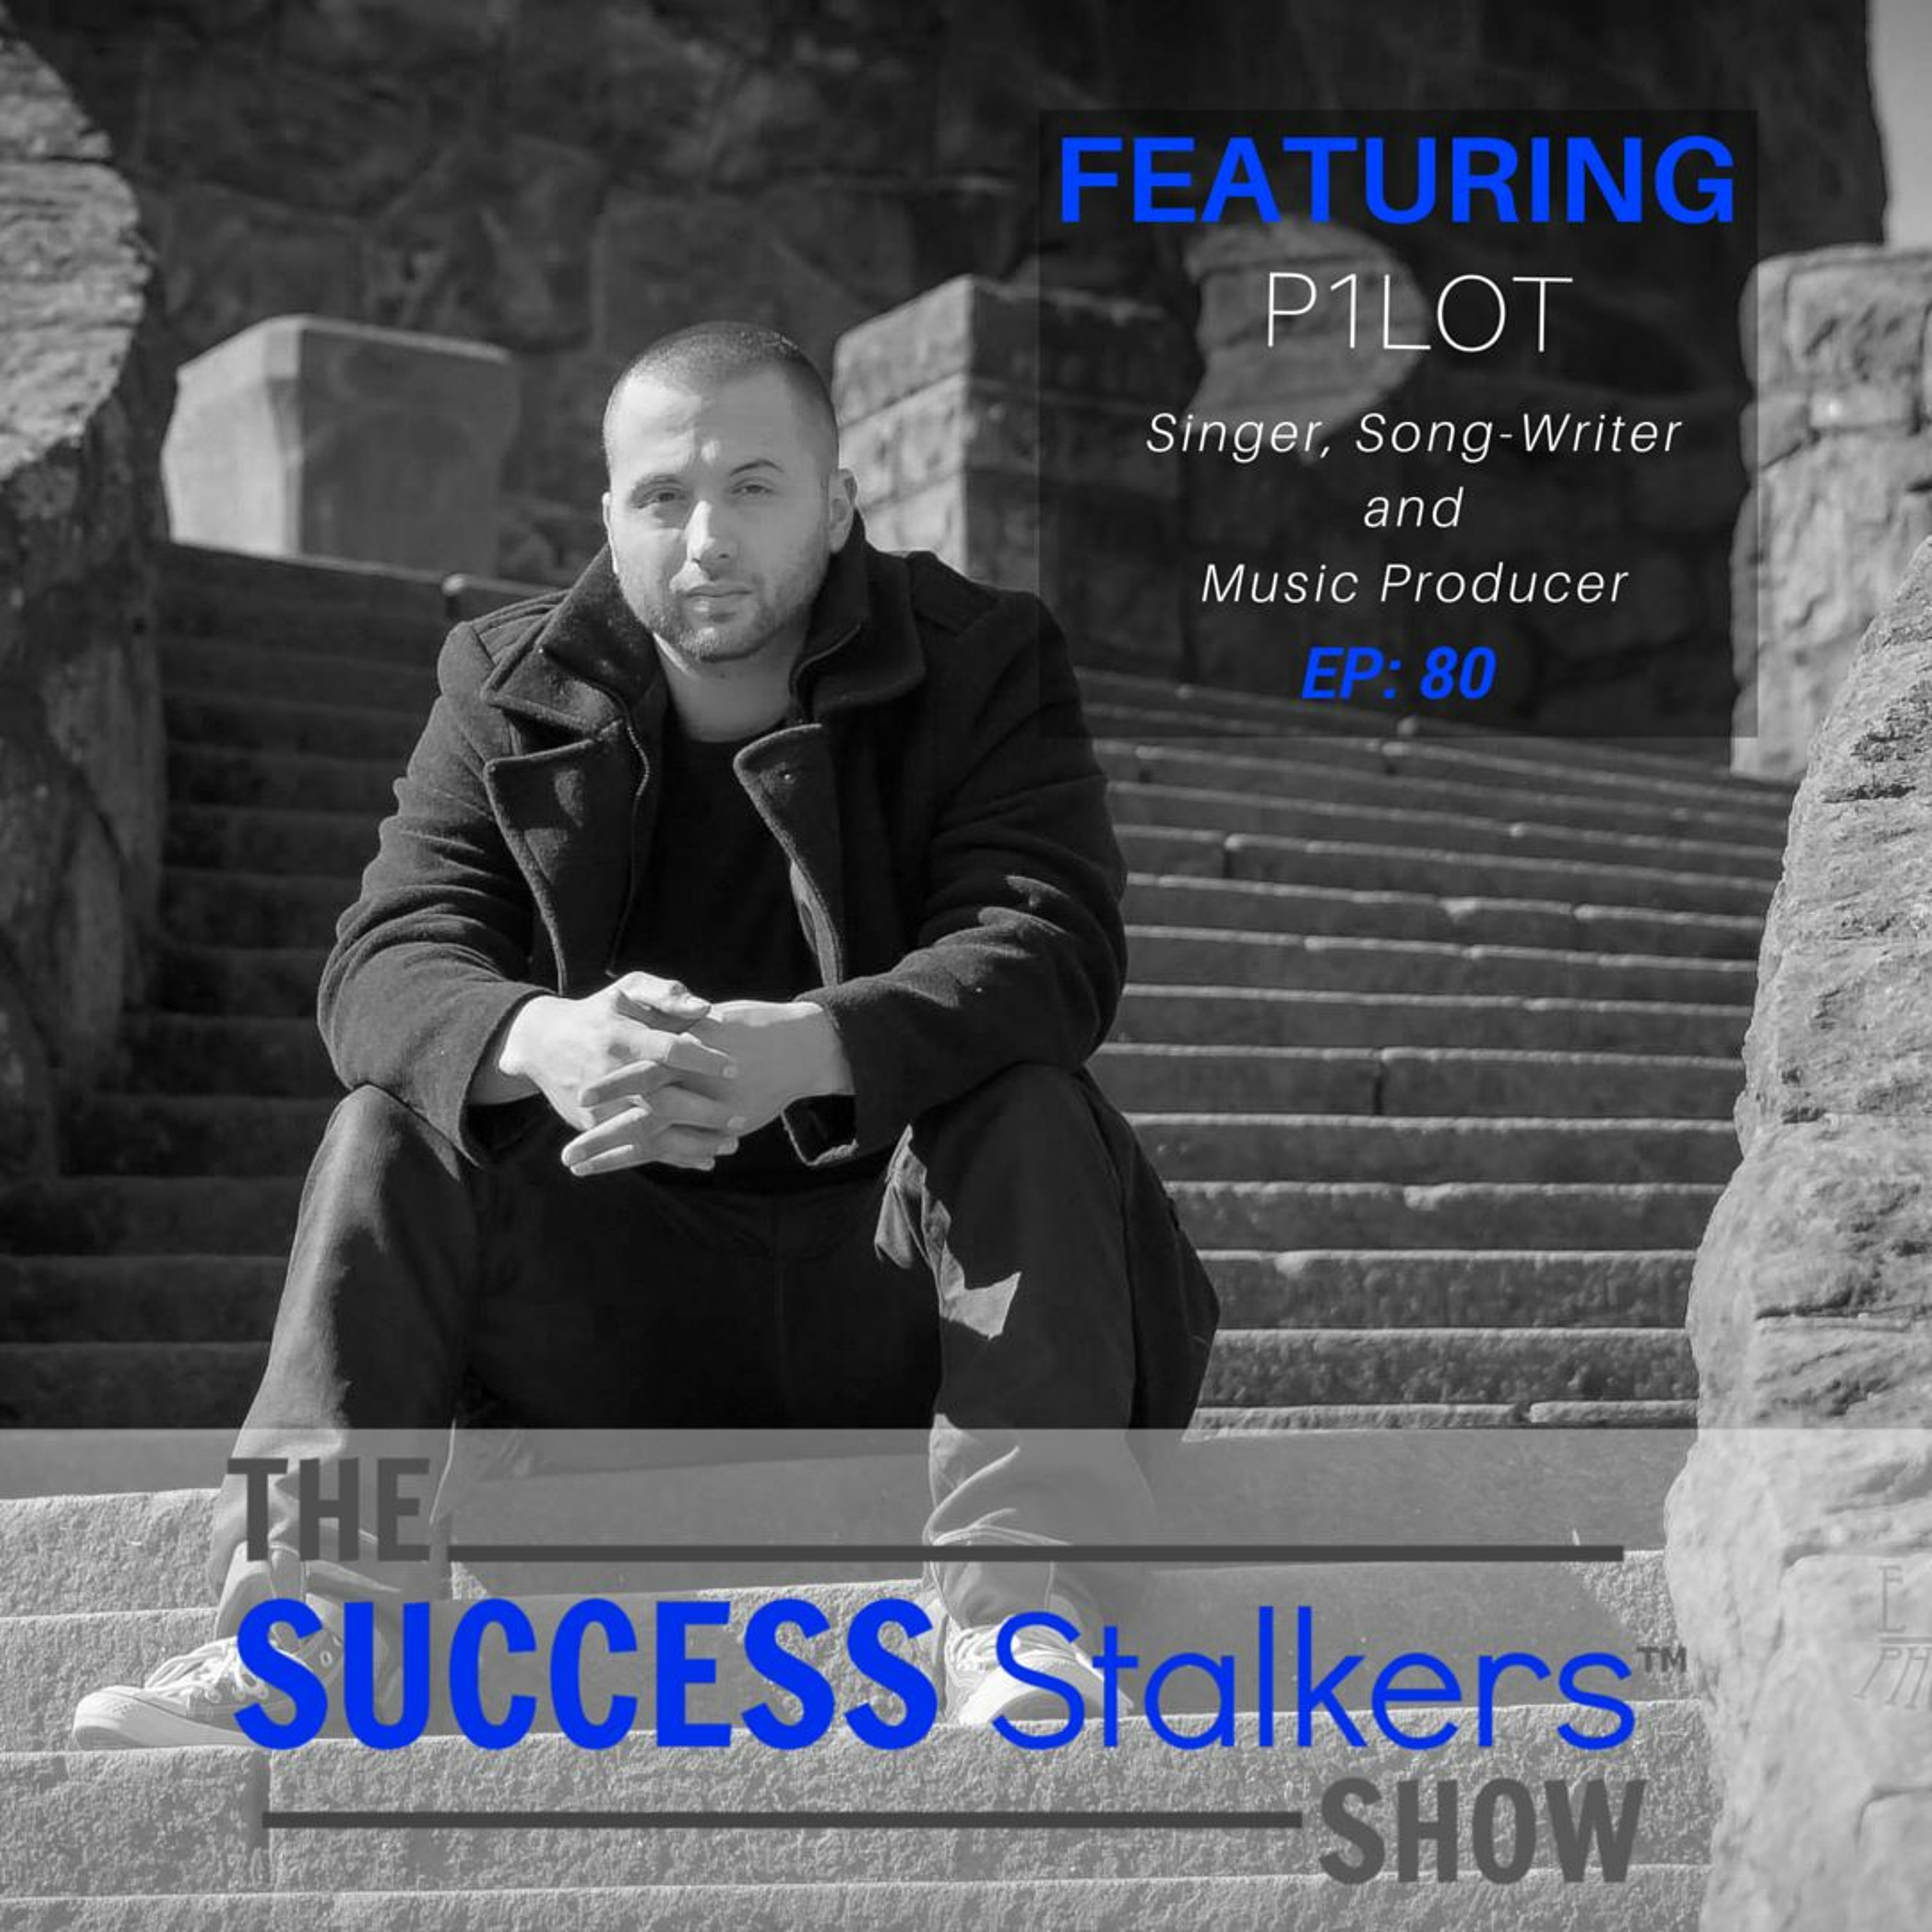 80: Singer, Song Writer & Music Producer, P1LOT Shares His Success Journey